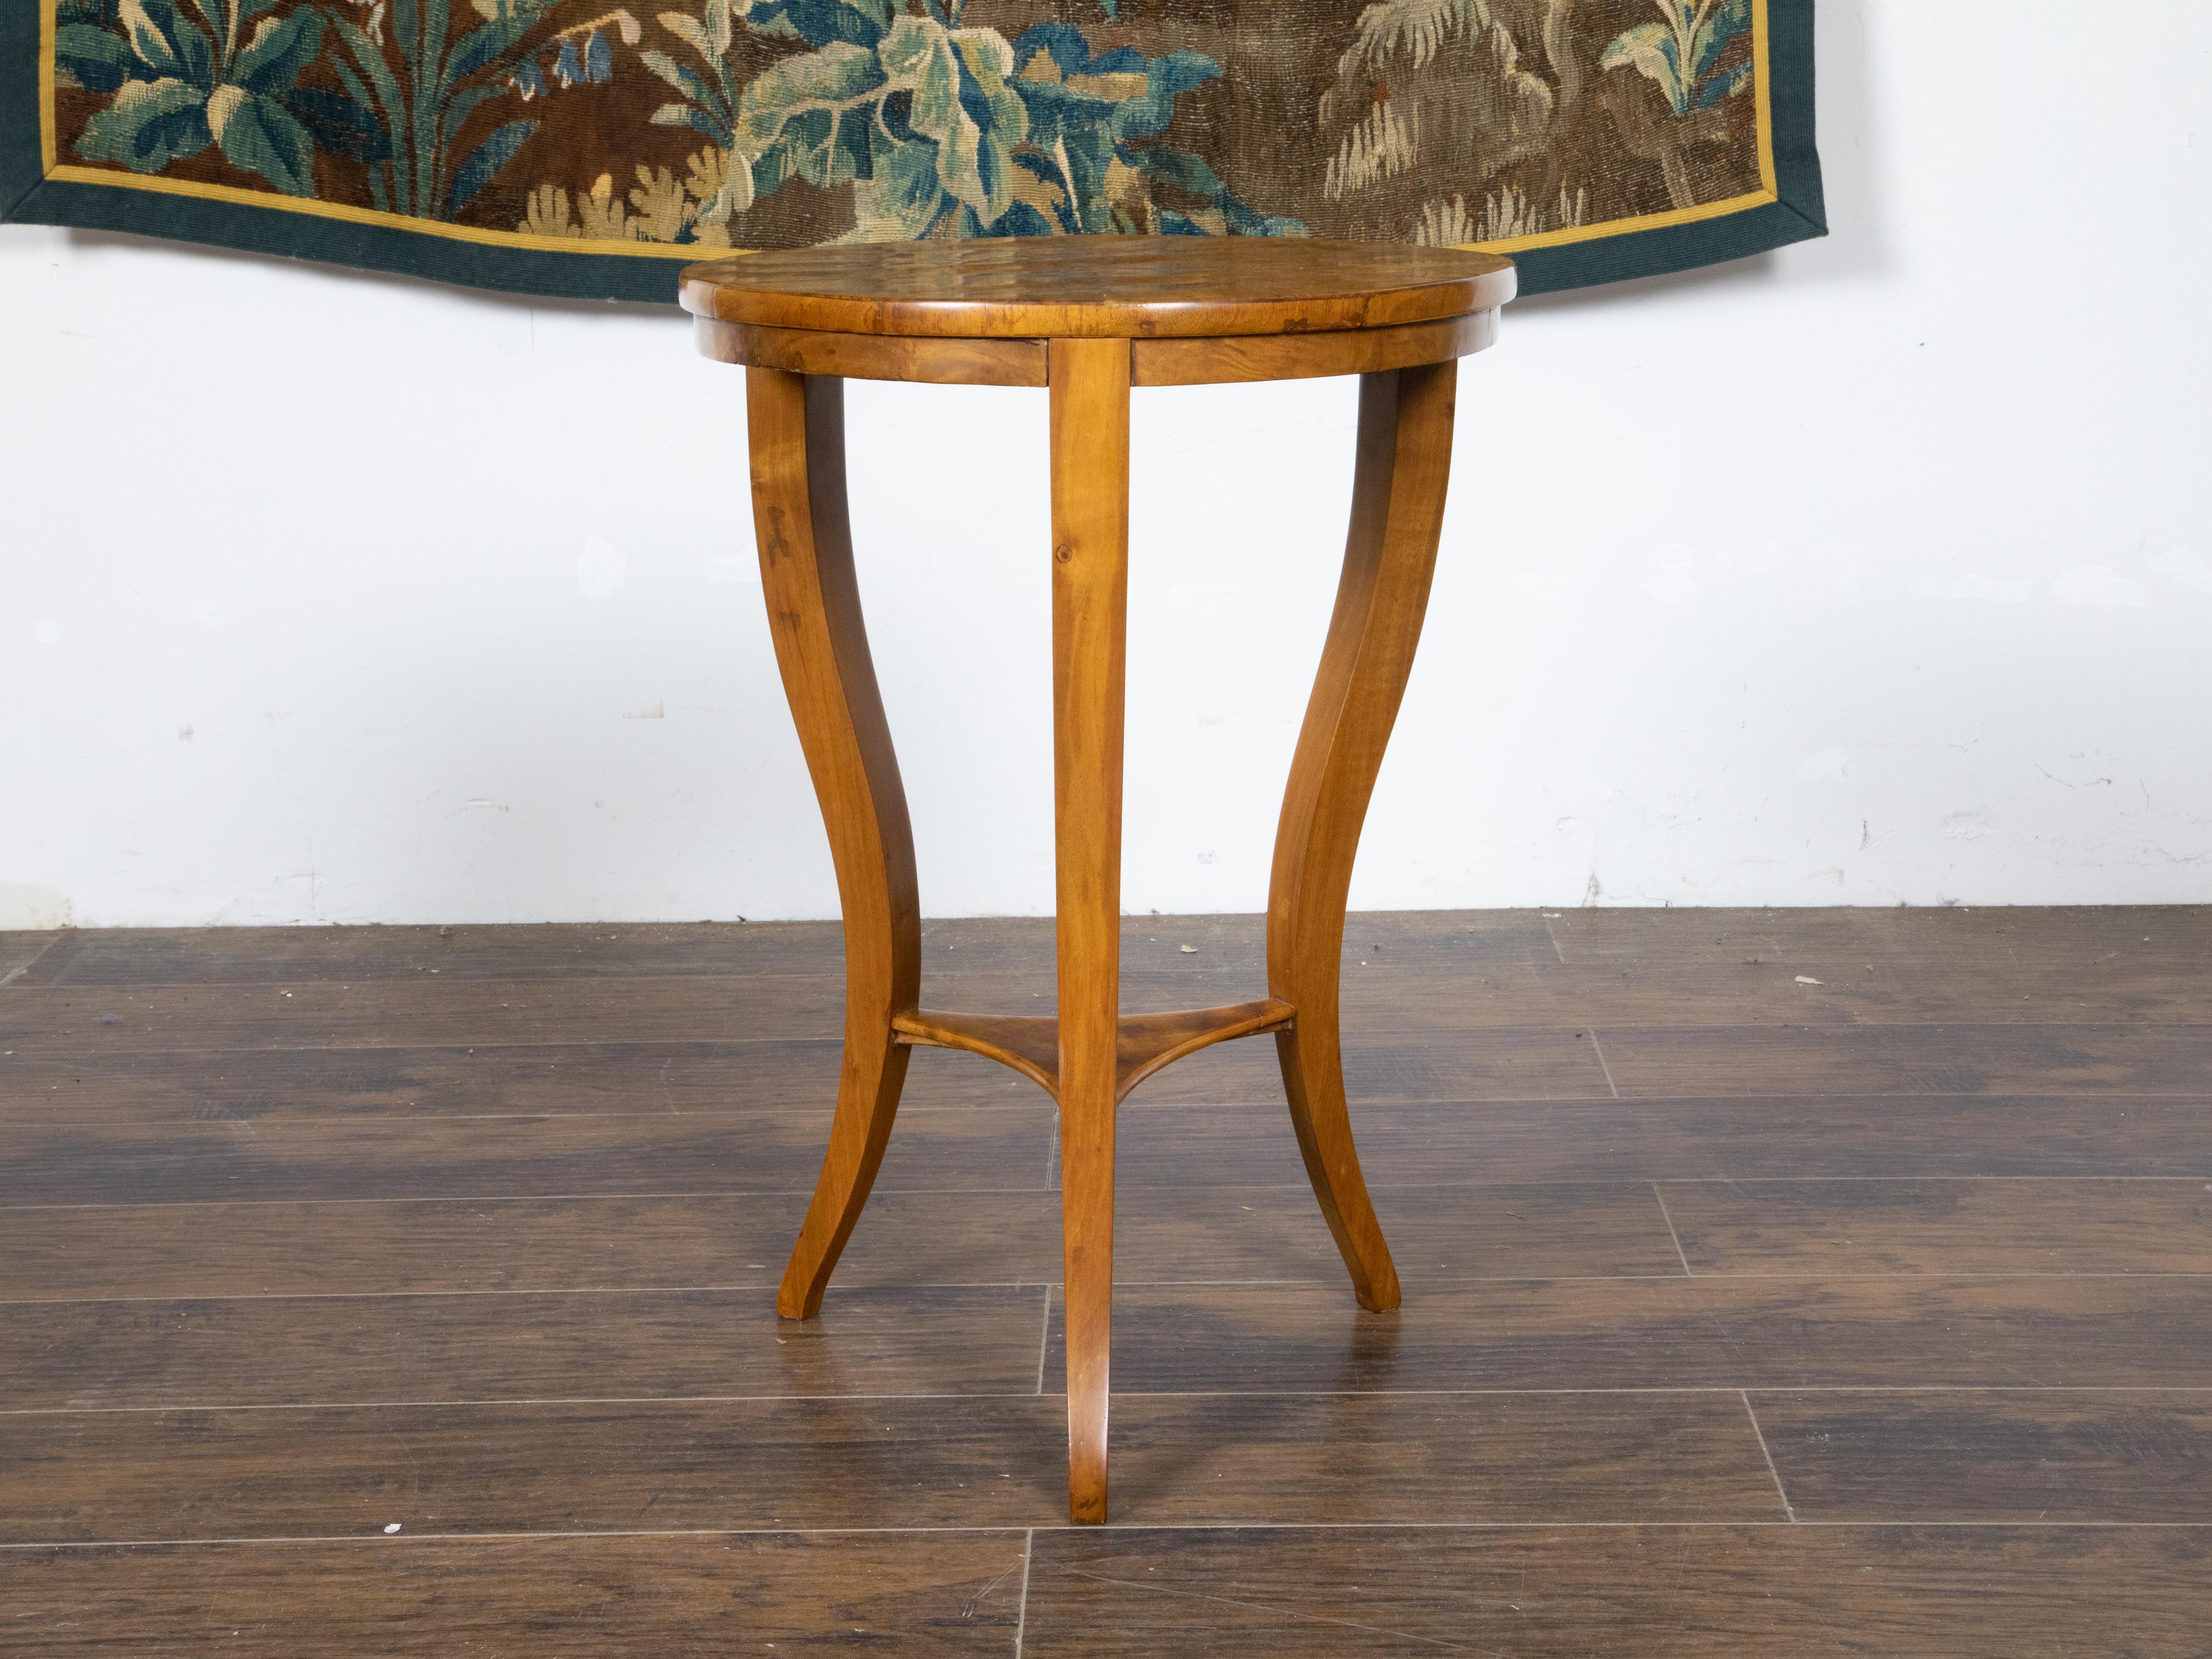 An Austrian Biedermeier period walnut side table from the 19th century with radiating veneer, curving legs and lower shelf. Created in Austria during the Biedermeier period in the 19th century, this walnut side table features a circular top adorned